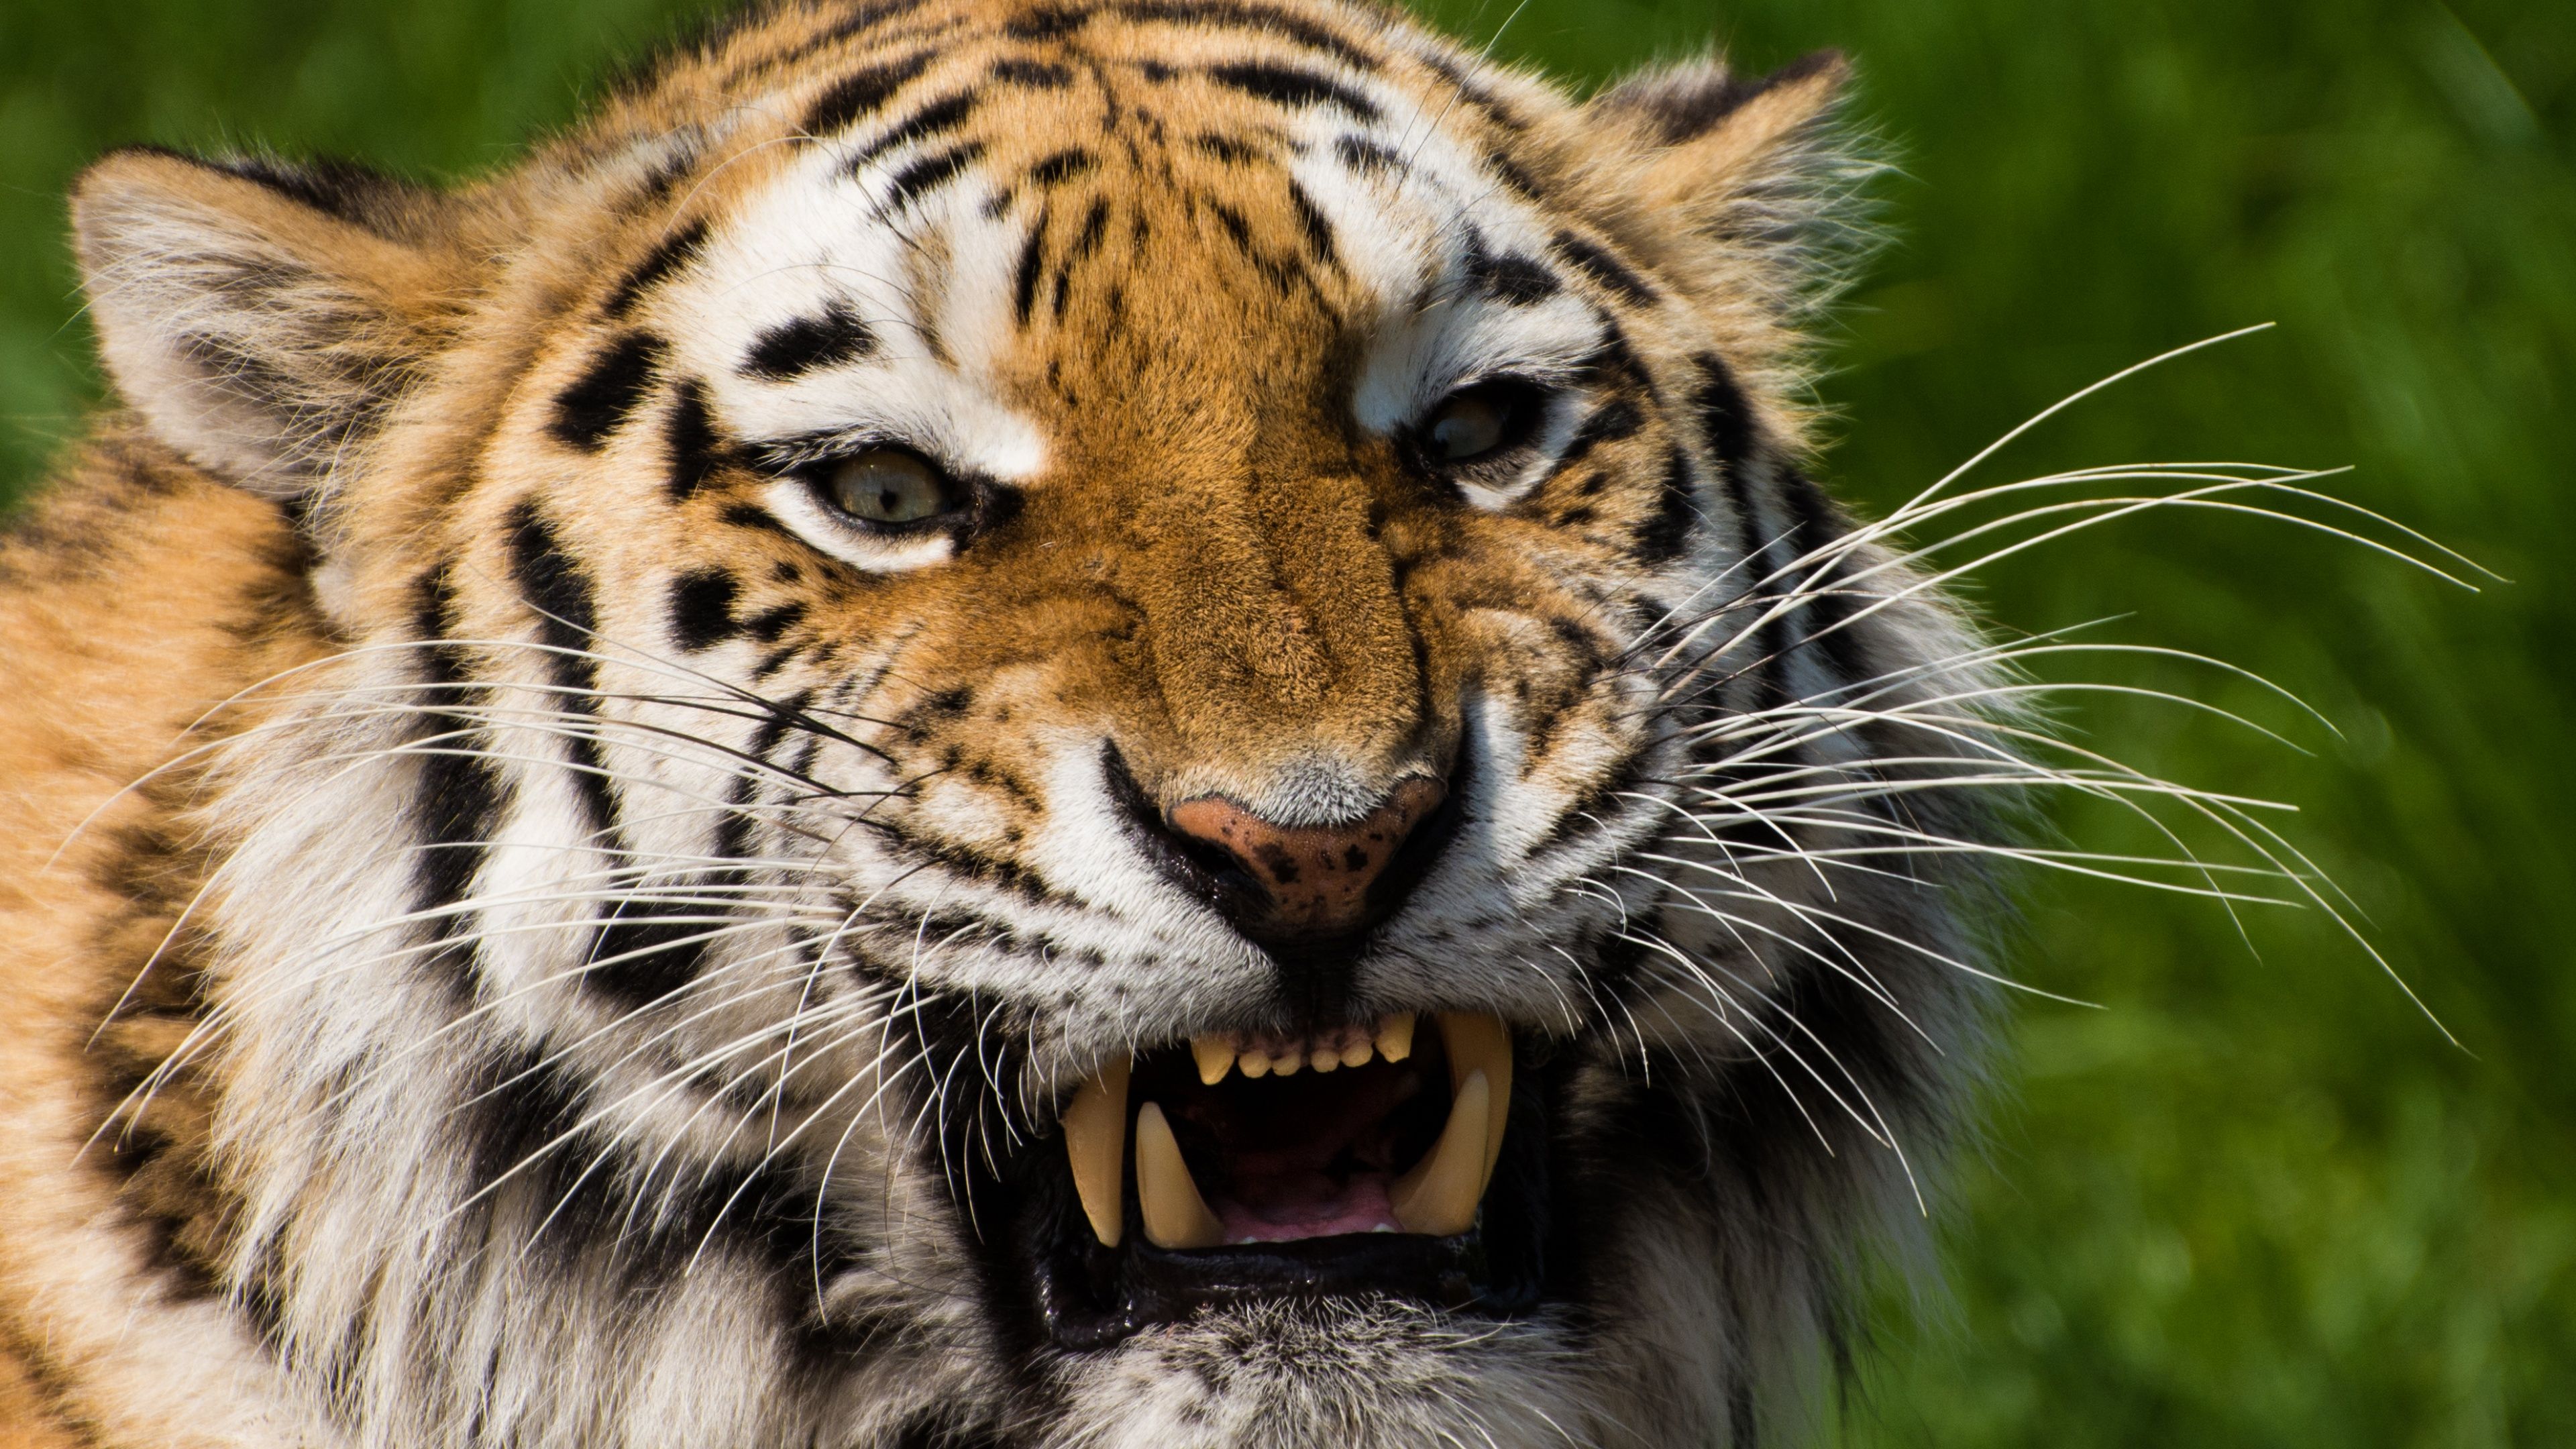 A tiger with its mouth open and teeth bared - Tiger